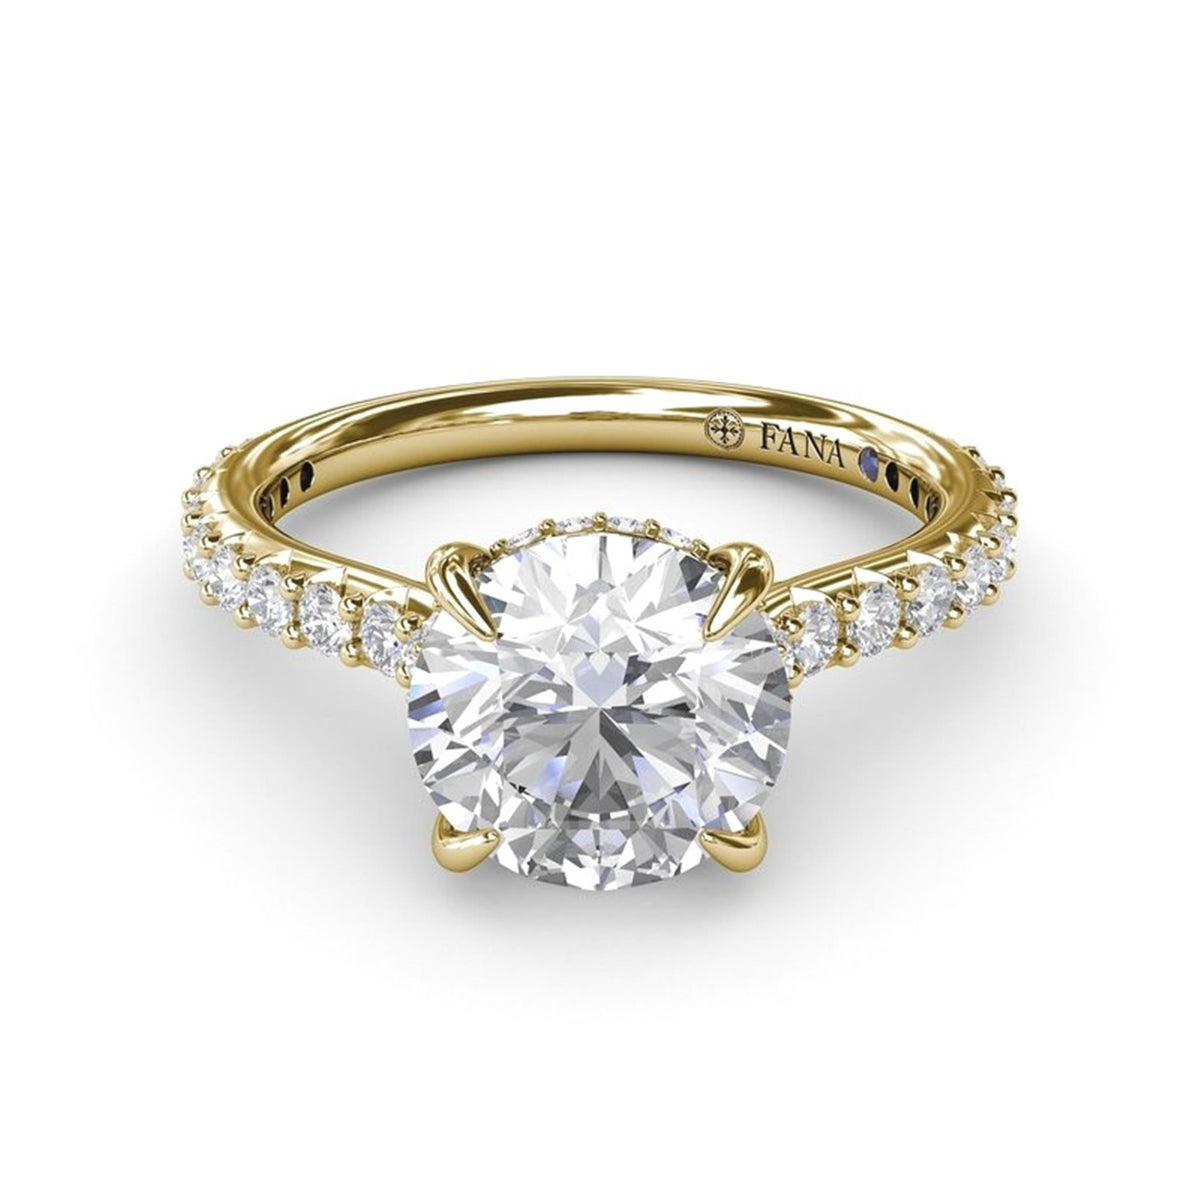 14Kt Yellow Gold Classic Prong Engagement Ring Mounting With 0.47cttw Natural Diamonds